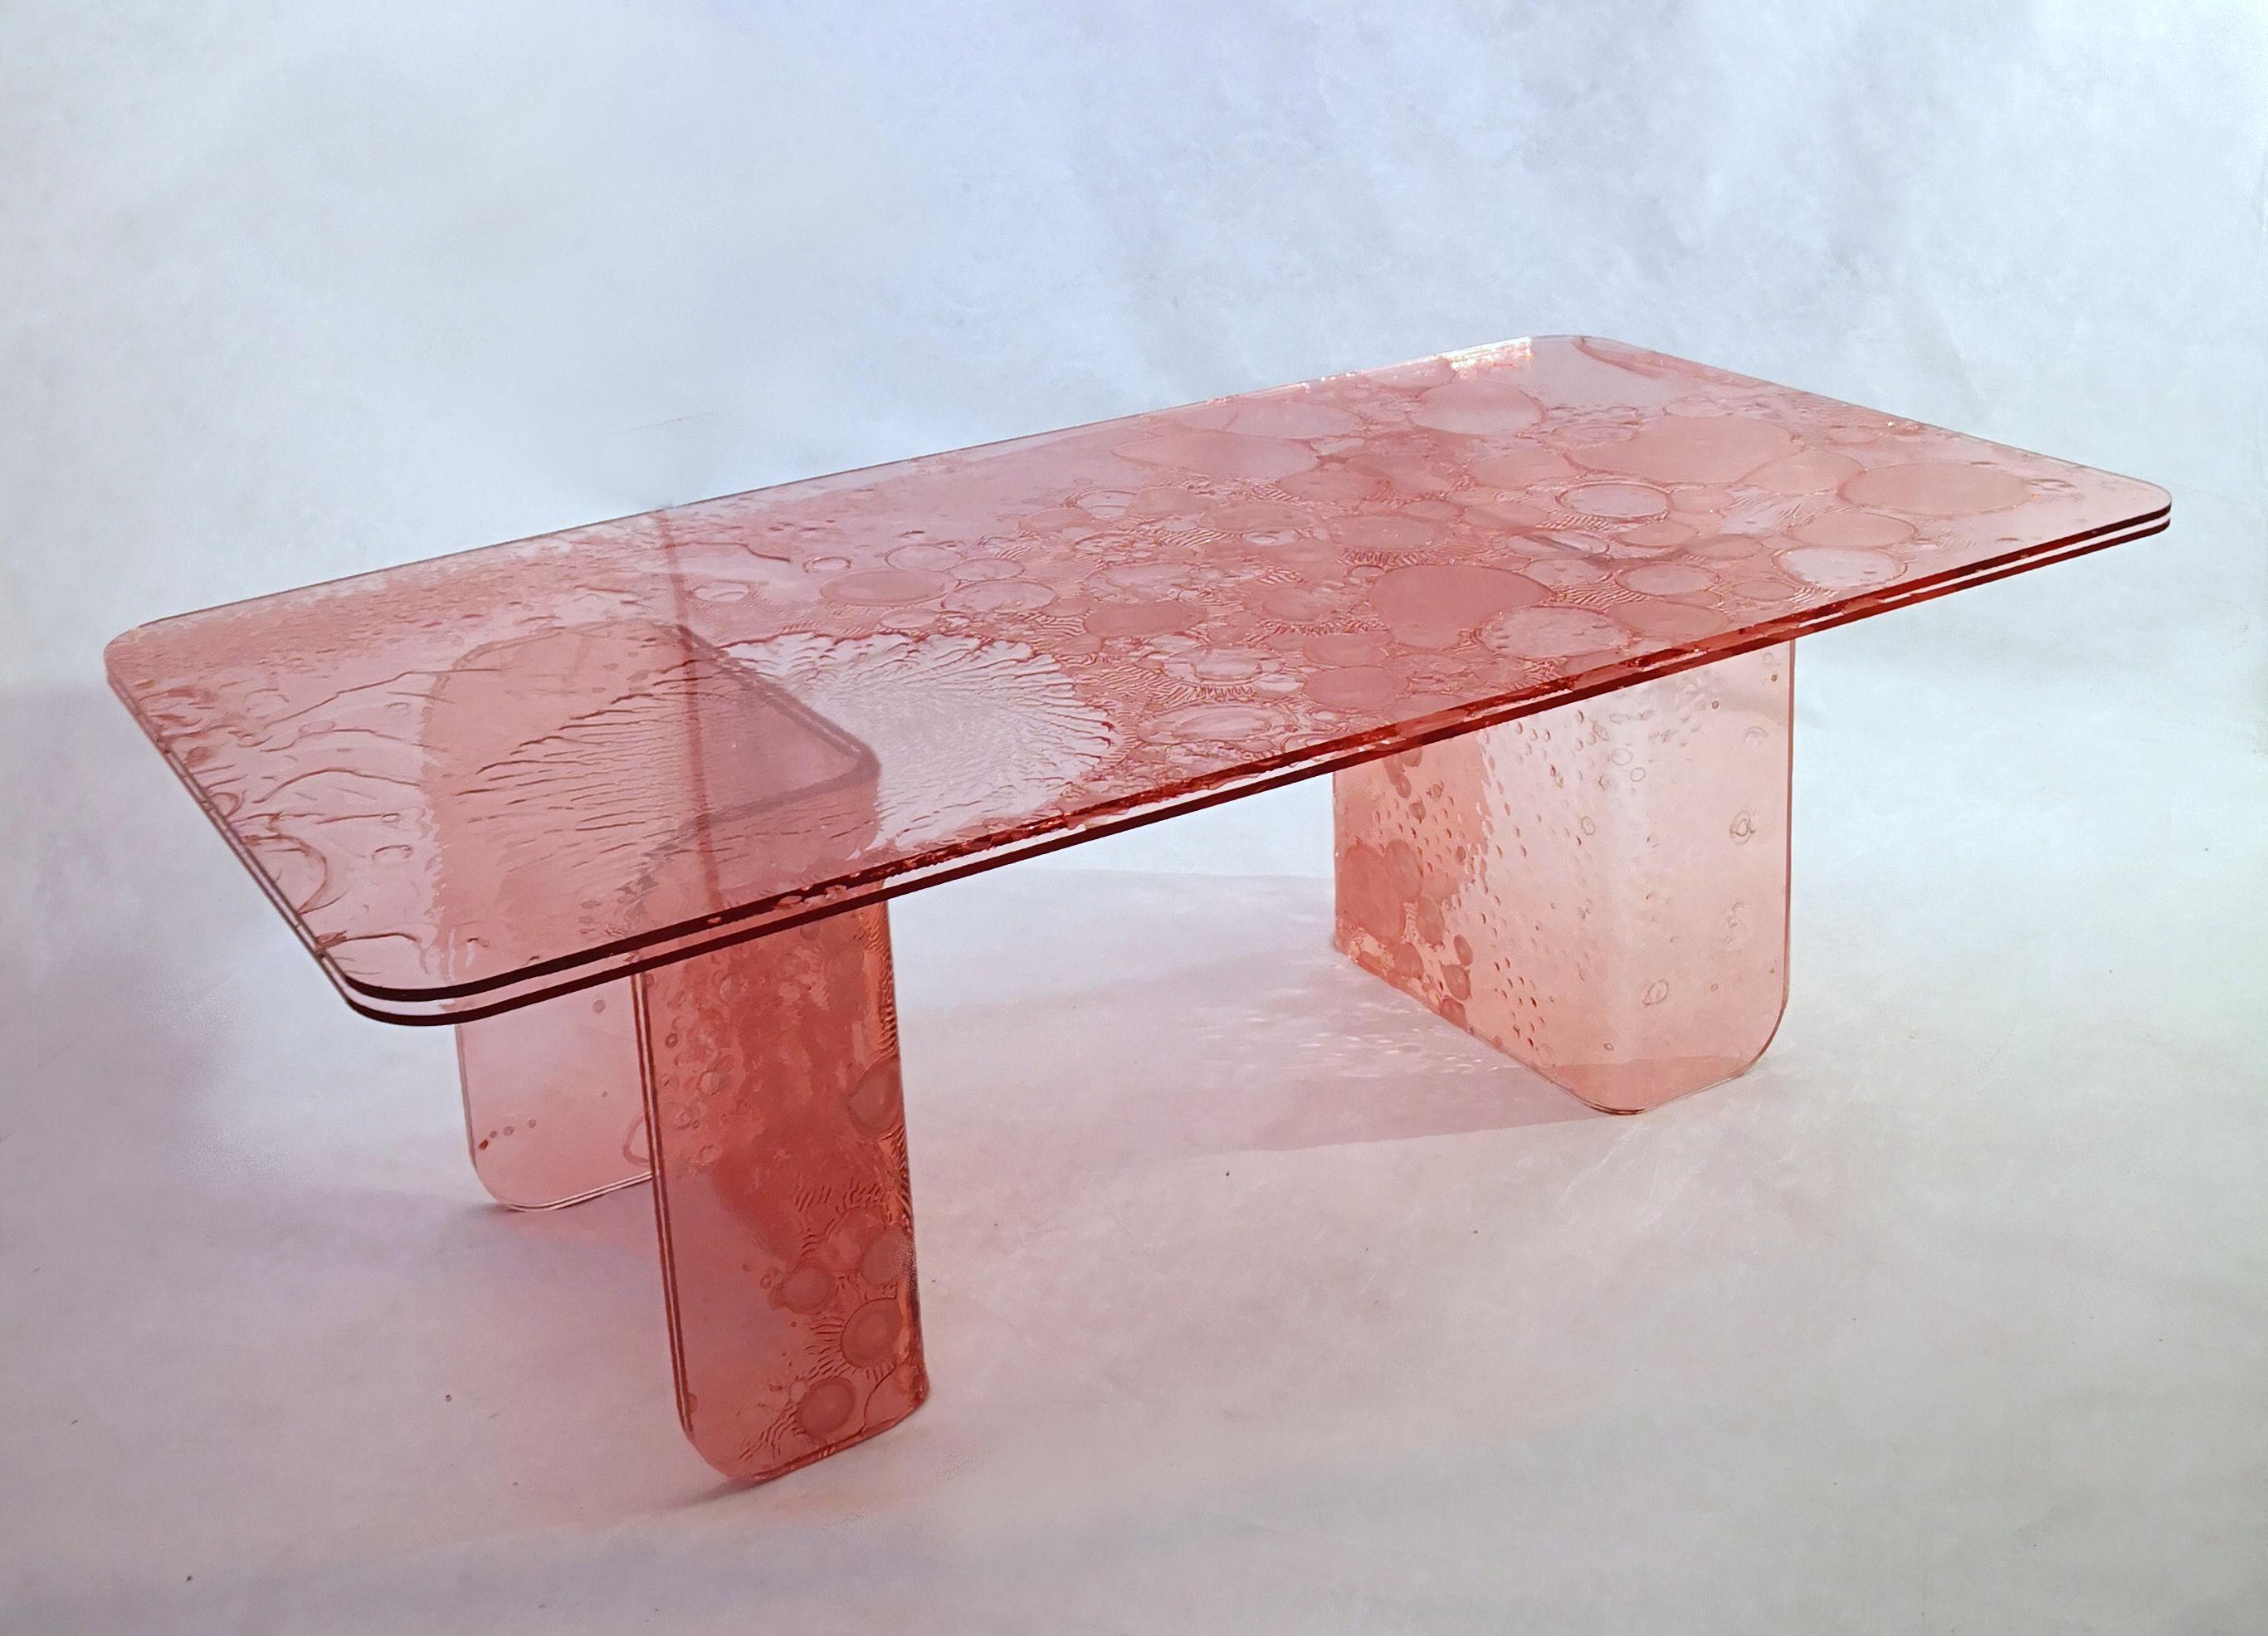 Coffee table, handmade in transparent acrylic colored with an innovative technology.
The material is made through the fusion of three plates, one of which
partially cured center.
This process creates unique and particular effects,